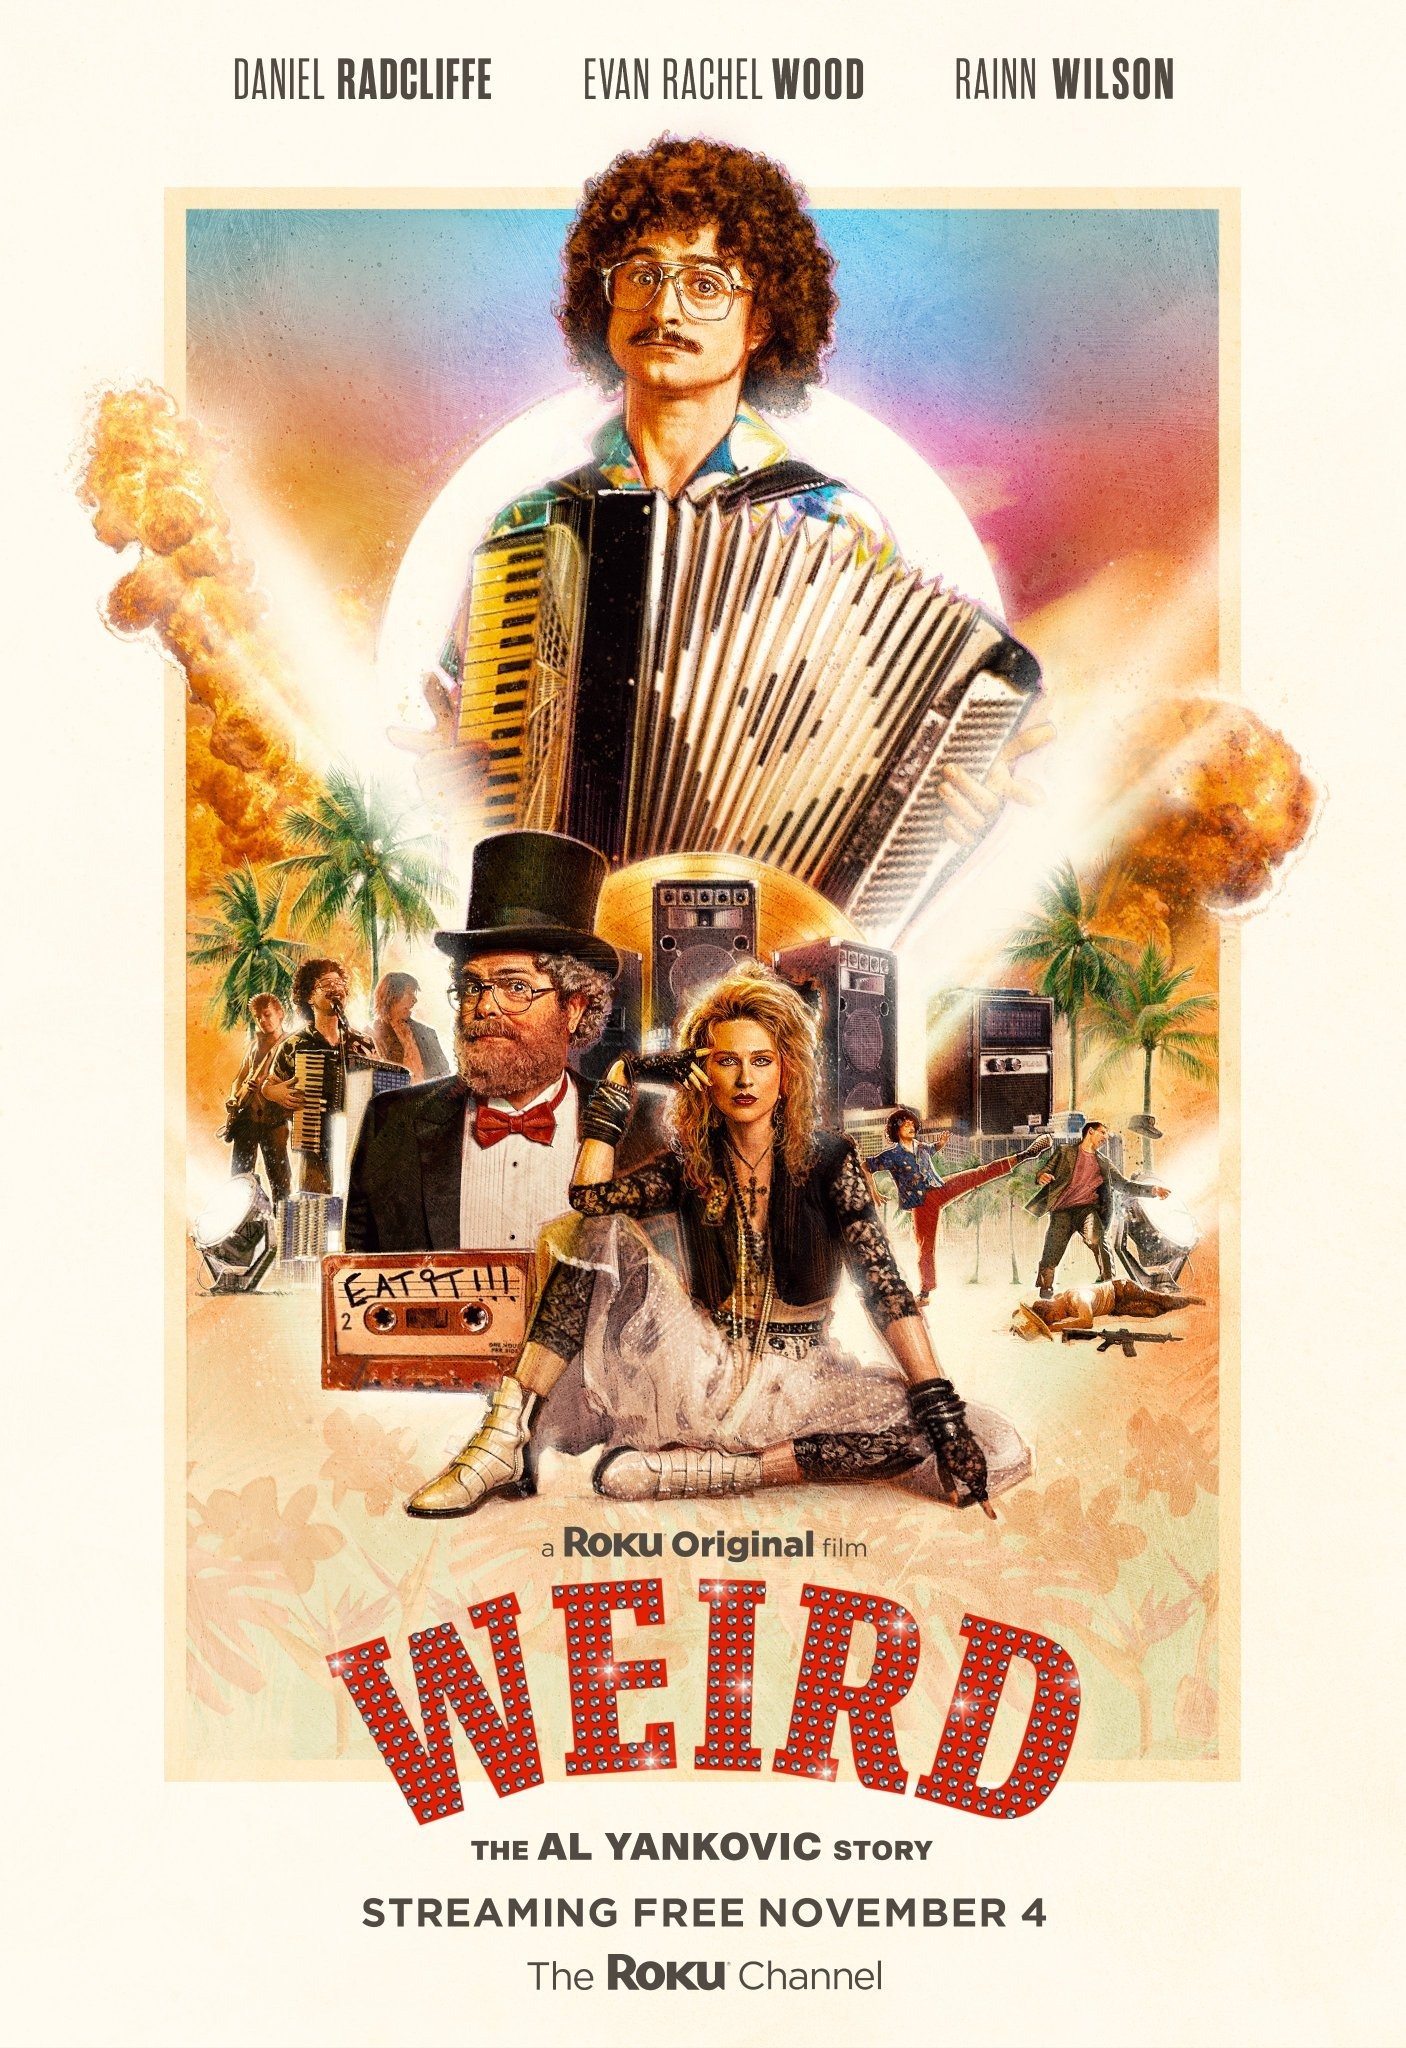 Weird: The Al Yankovic Story image © The Roku Channel